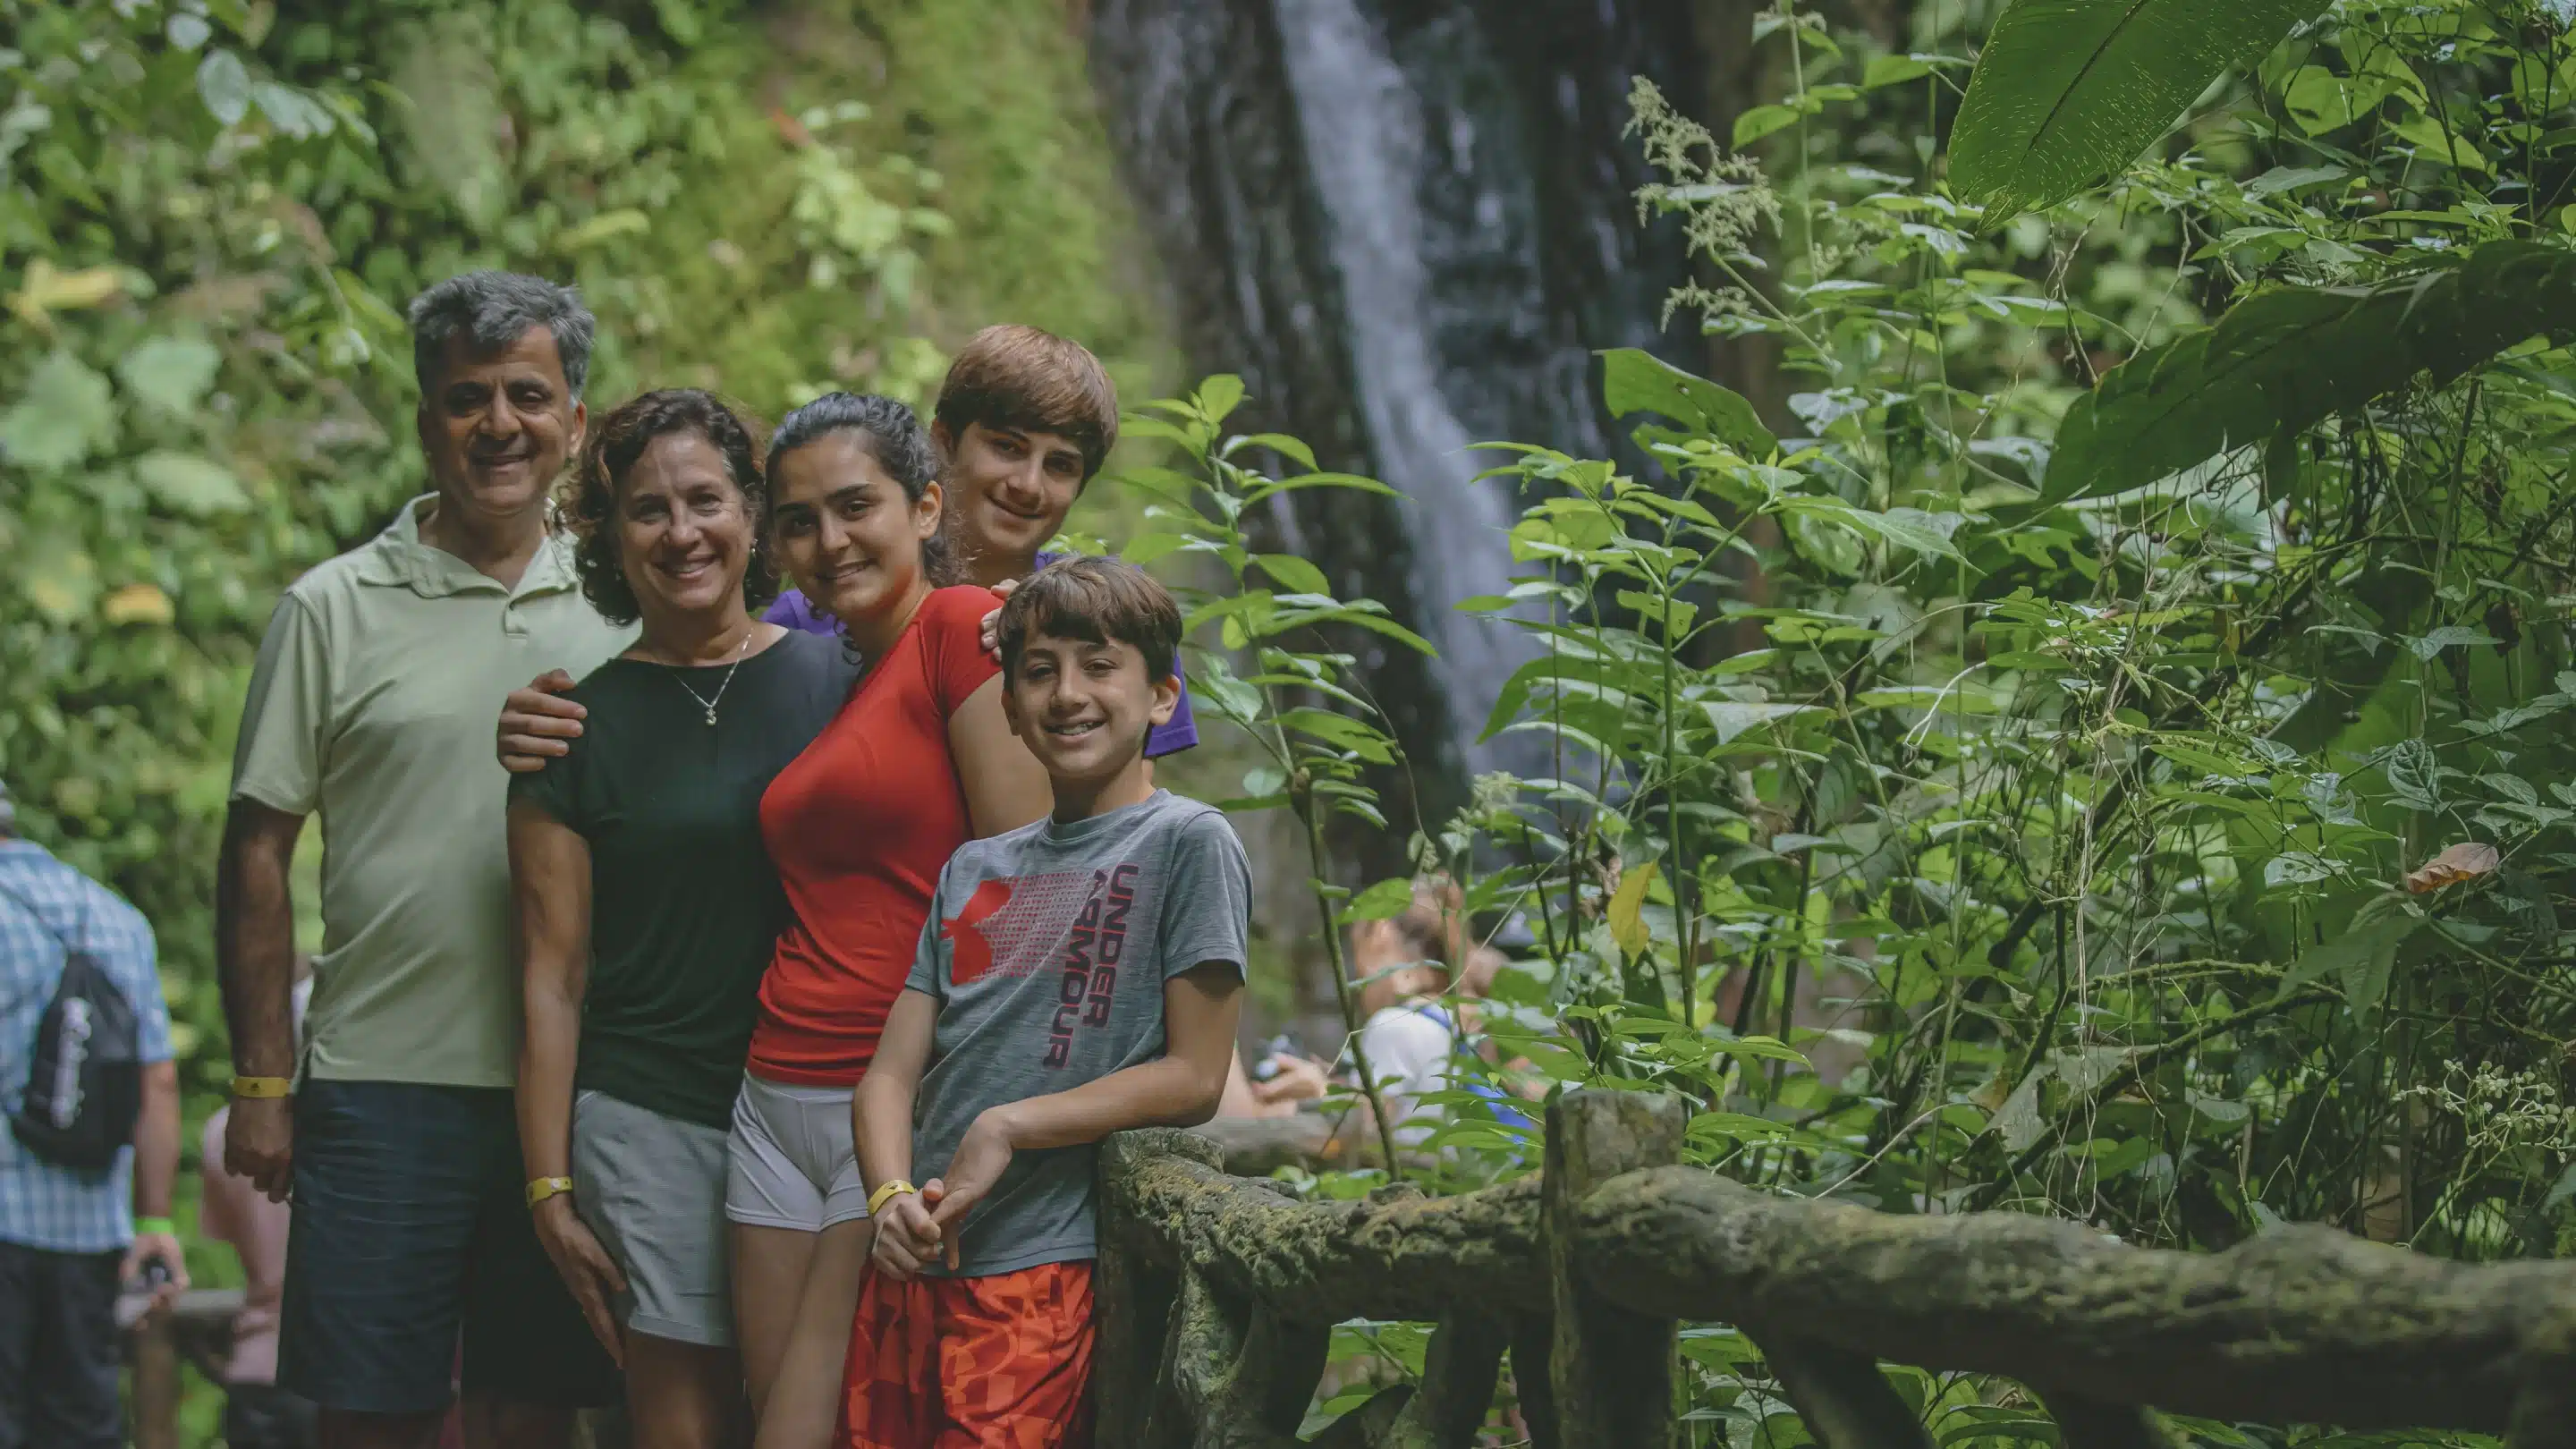 Costa Rica is a top choice for the expat community in Latin America because of its friendly locals, thrilling landscapes, and relaxed lifestyle.